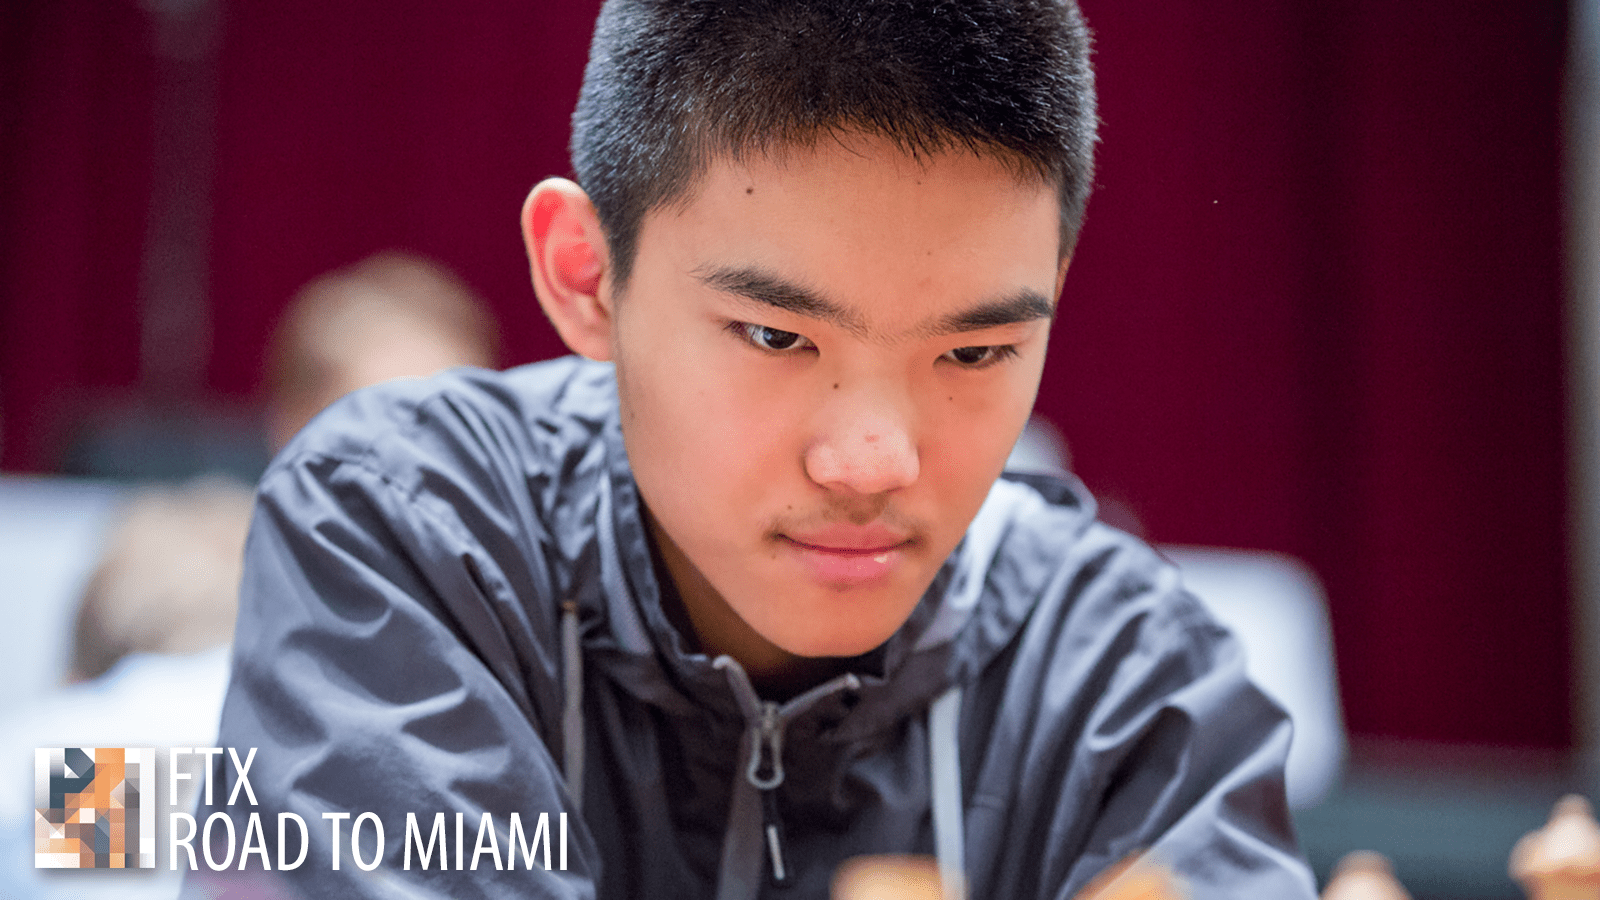 FTX Road To Miami: Jeffery Xiong Early Leader